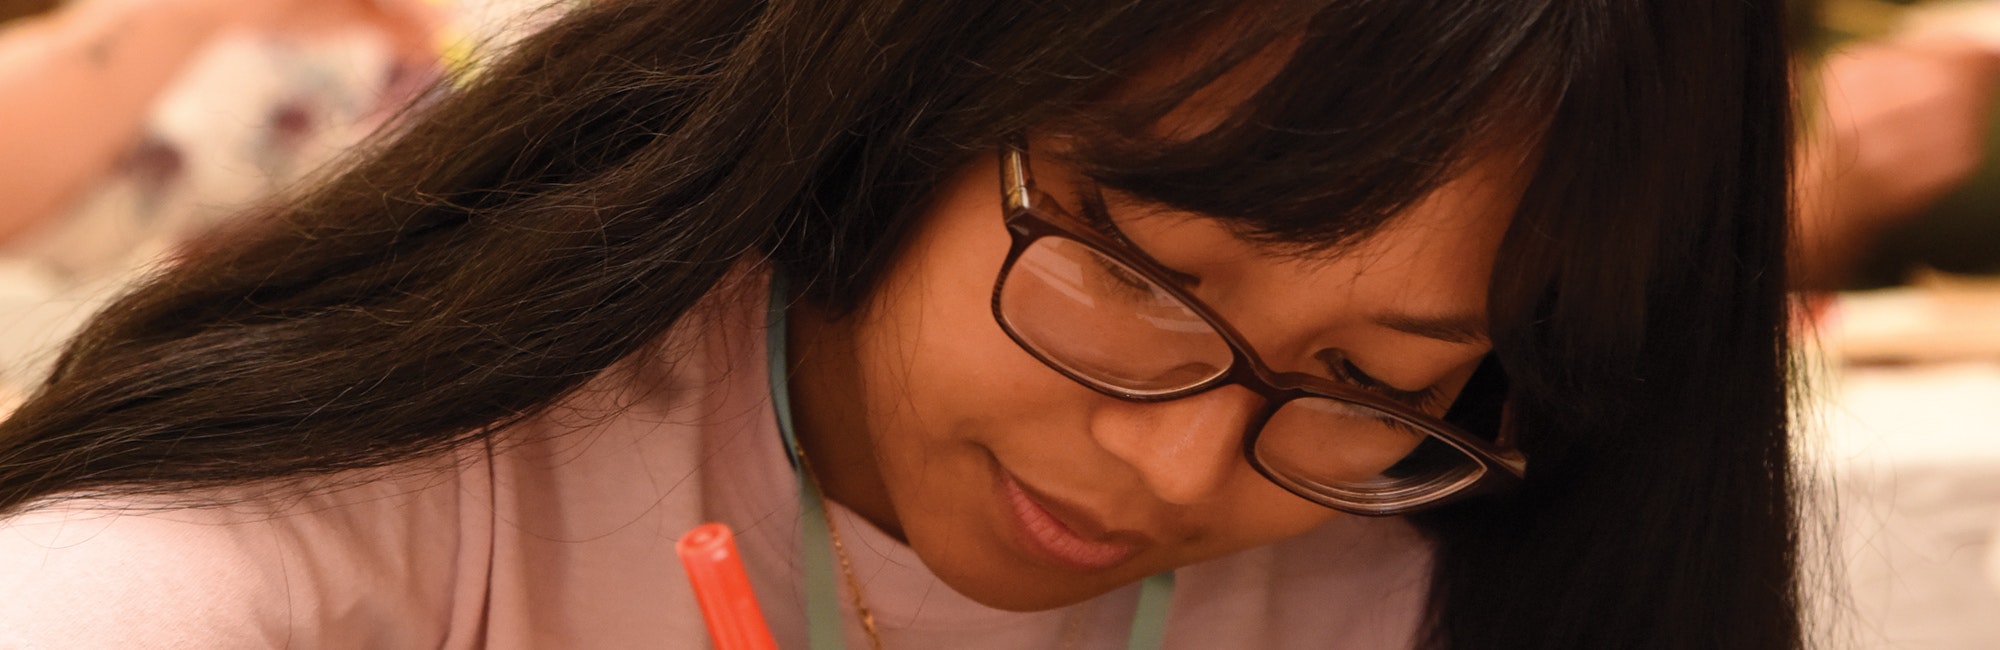 a very close cutoff shot of a Asian girl with glasses looking down and holding a pan